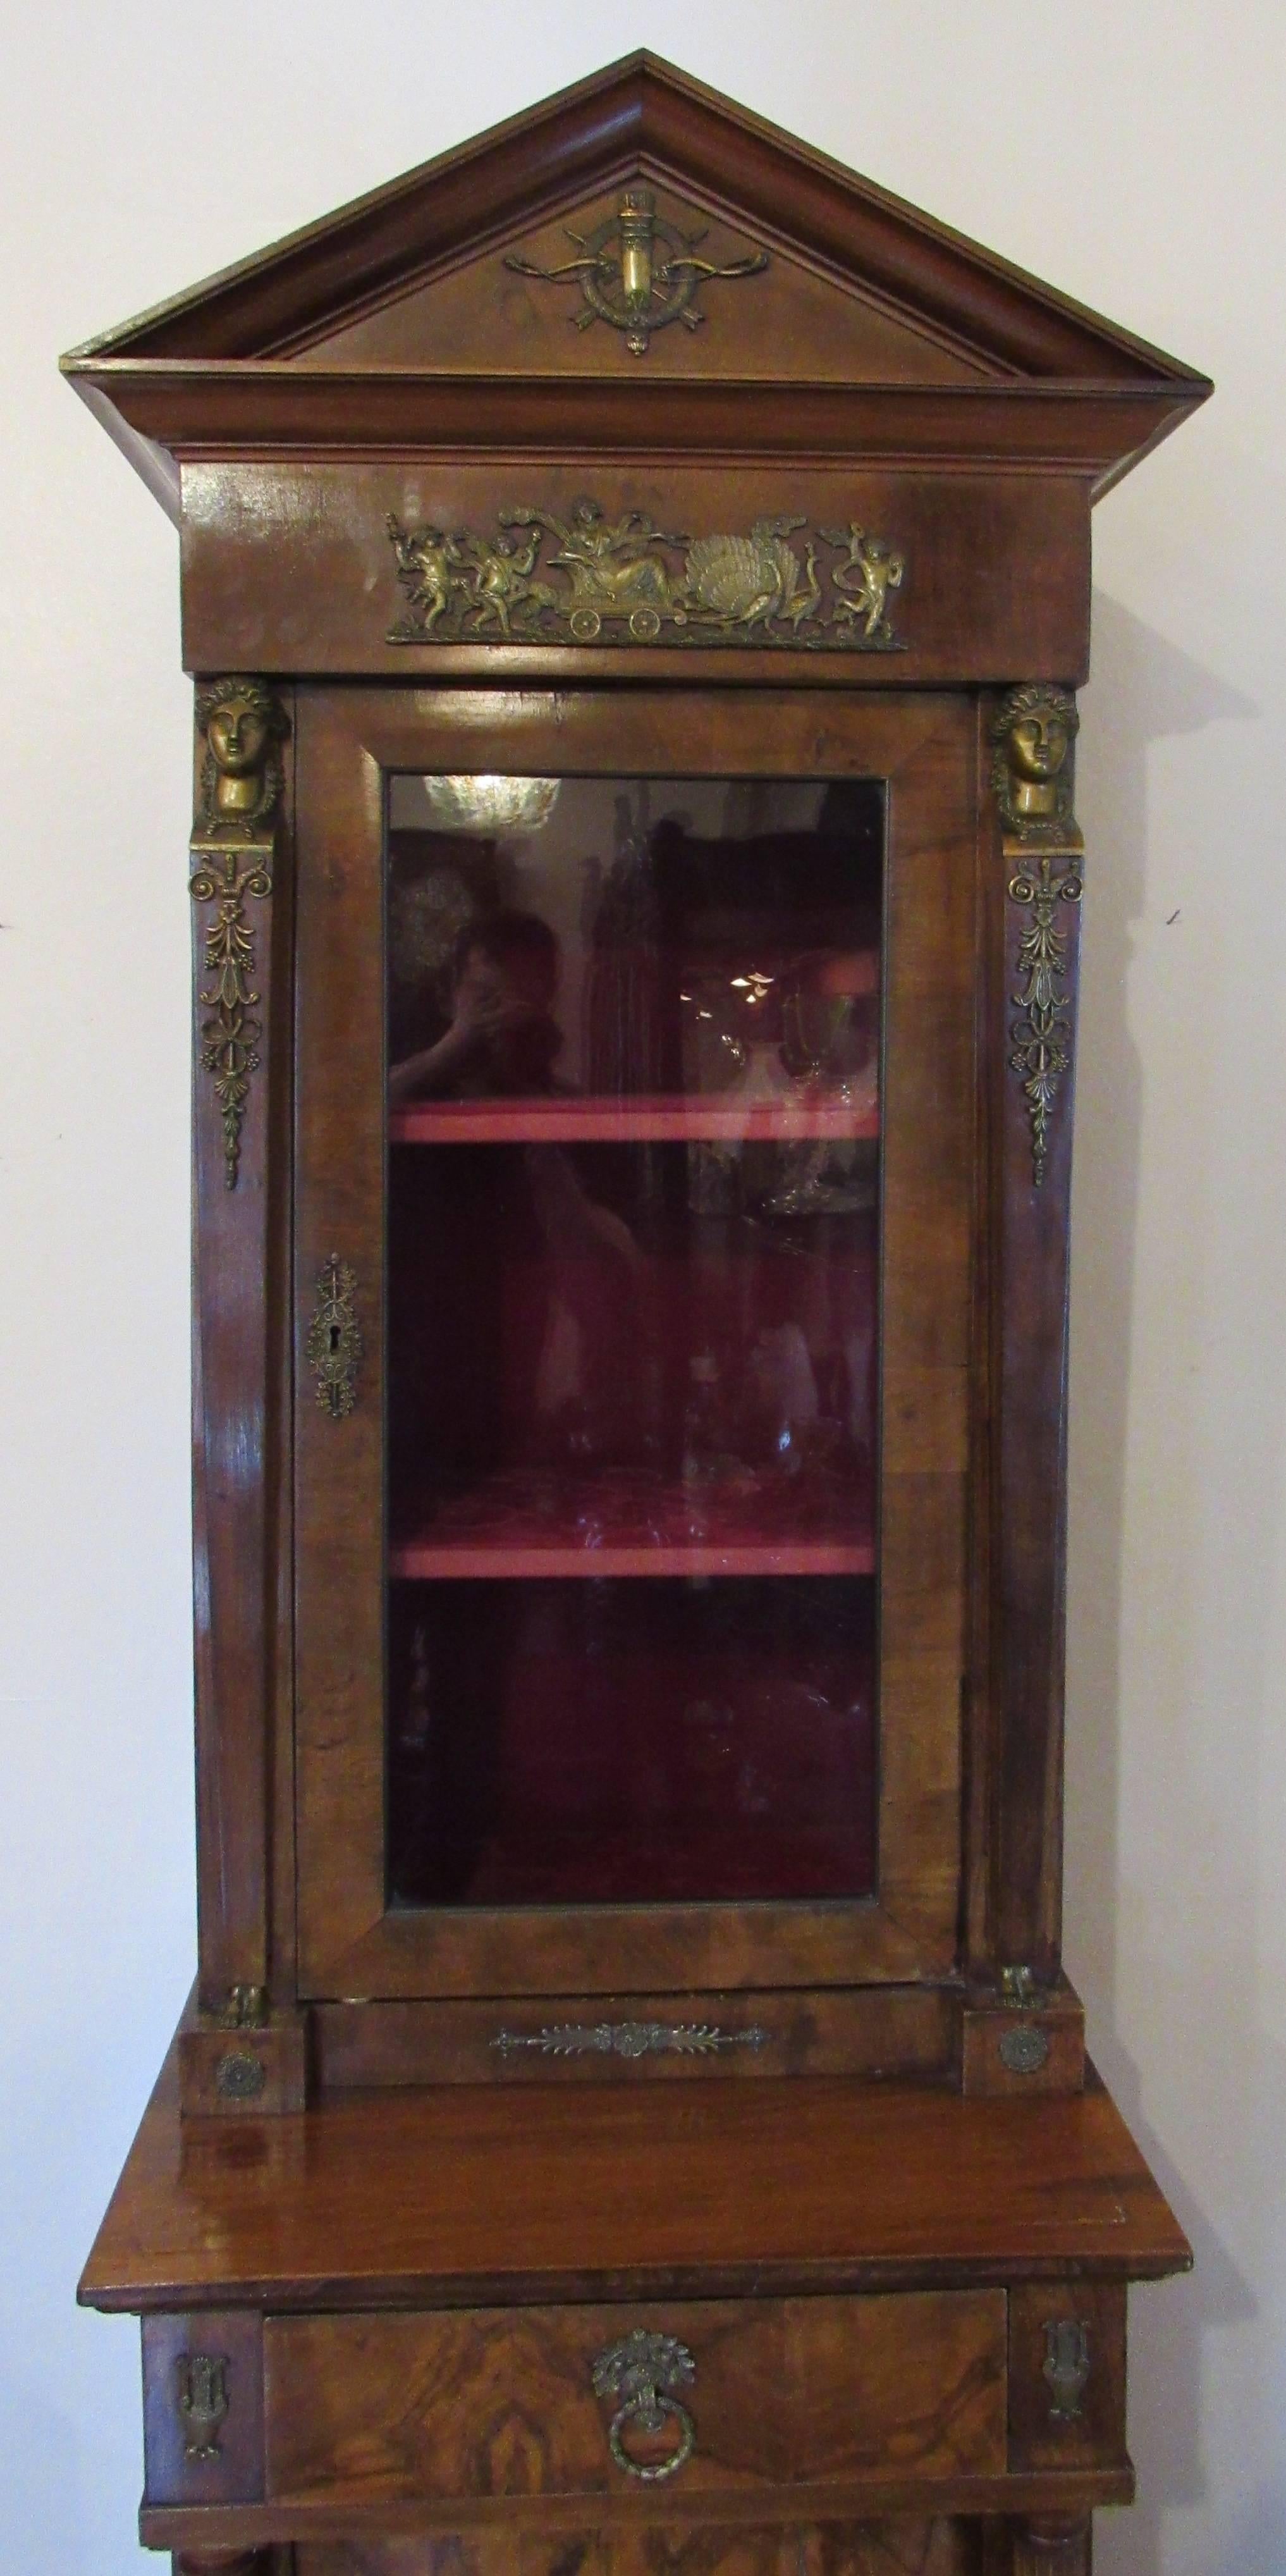 Lovely French Empire mahogany cabinet with classical ormolu mounts, 19th century.

Top section with red velvet interior and two shelves. Bottom cabinet with single rounded door with one interior shelf.

Measures: 82